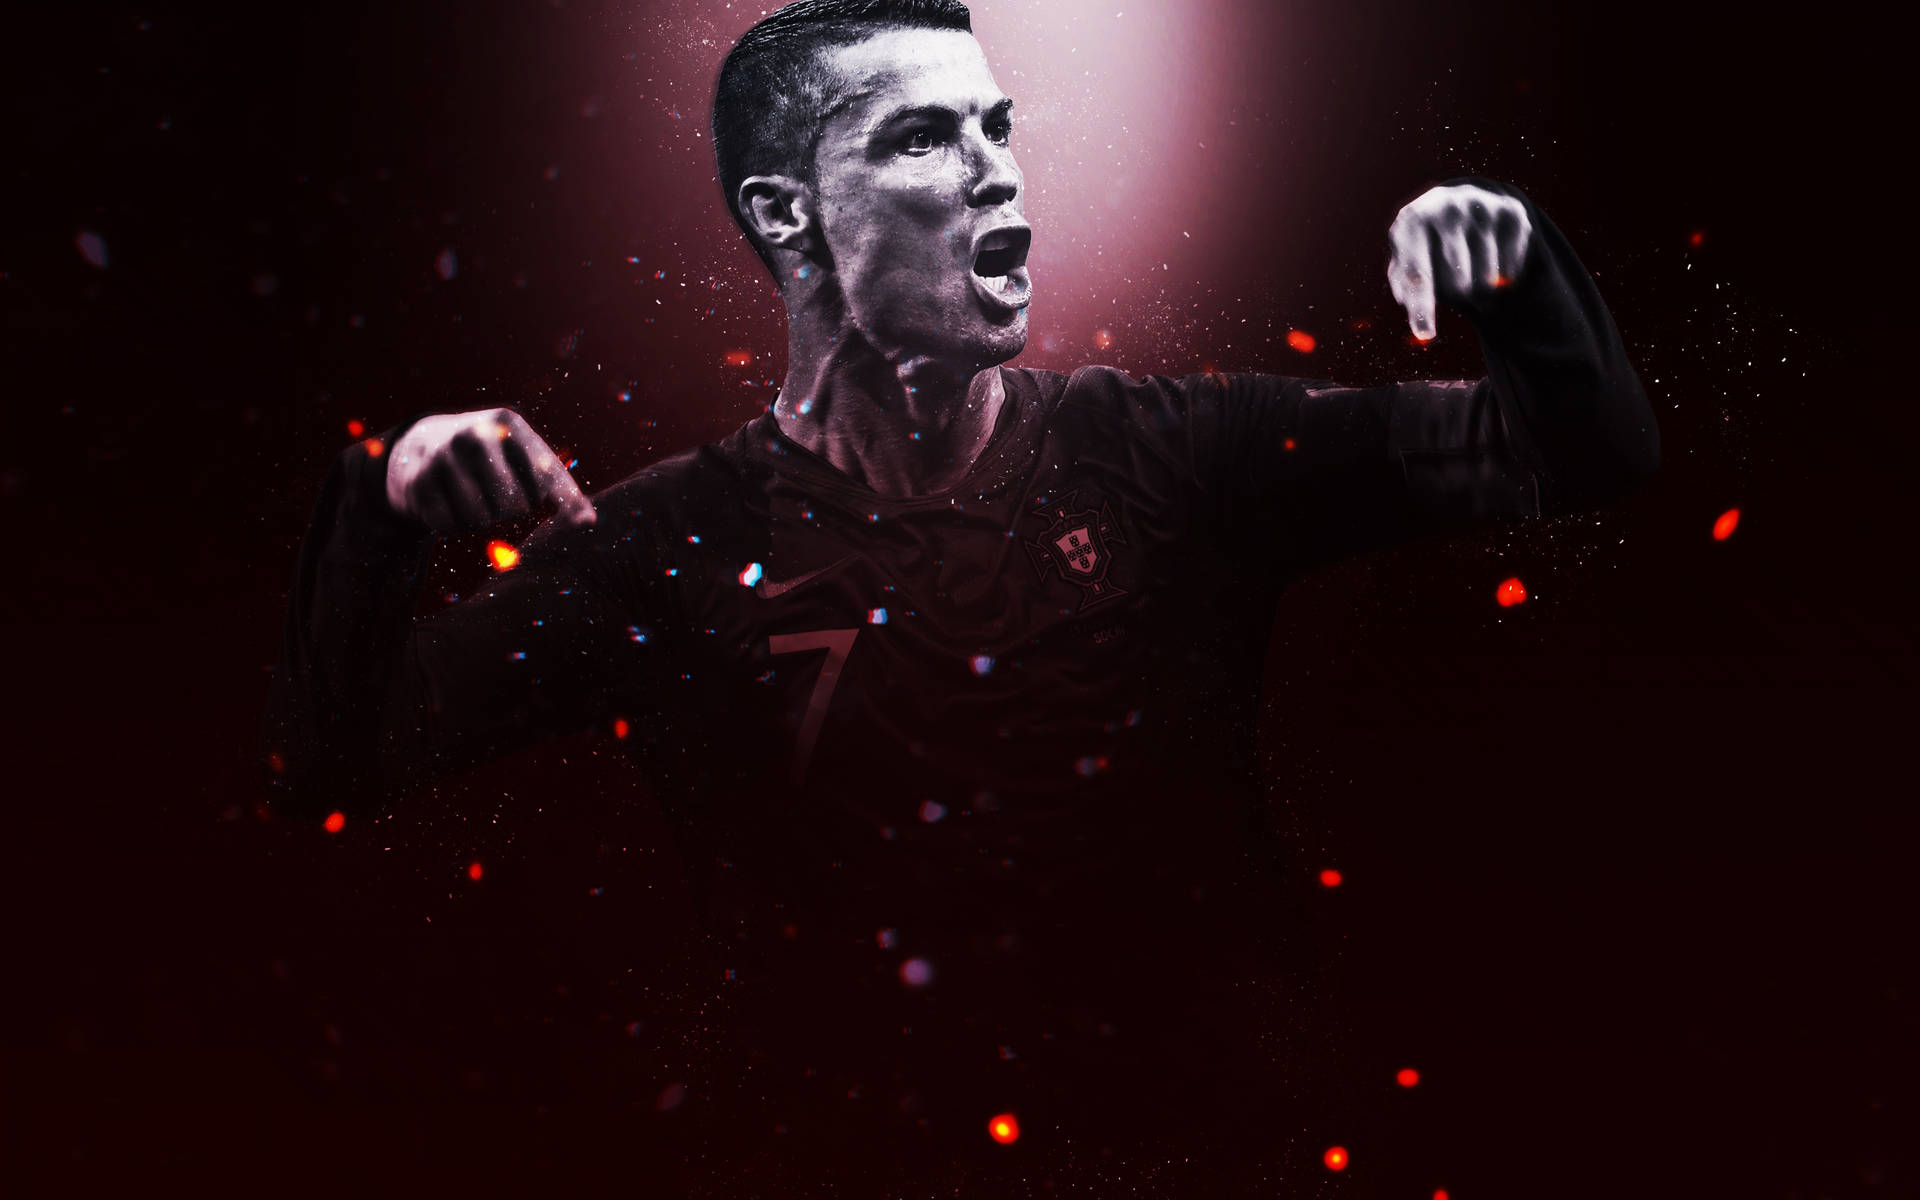 570+ Cristiano Ronaldo HD Wallpapers and Backgrounds